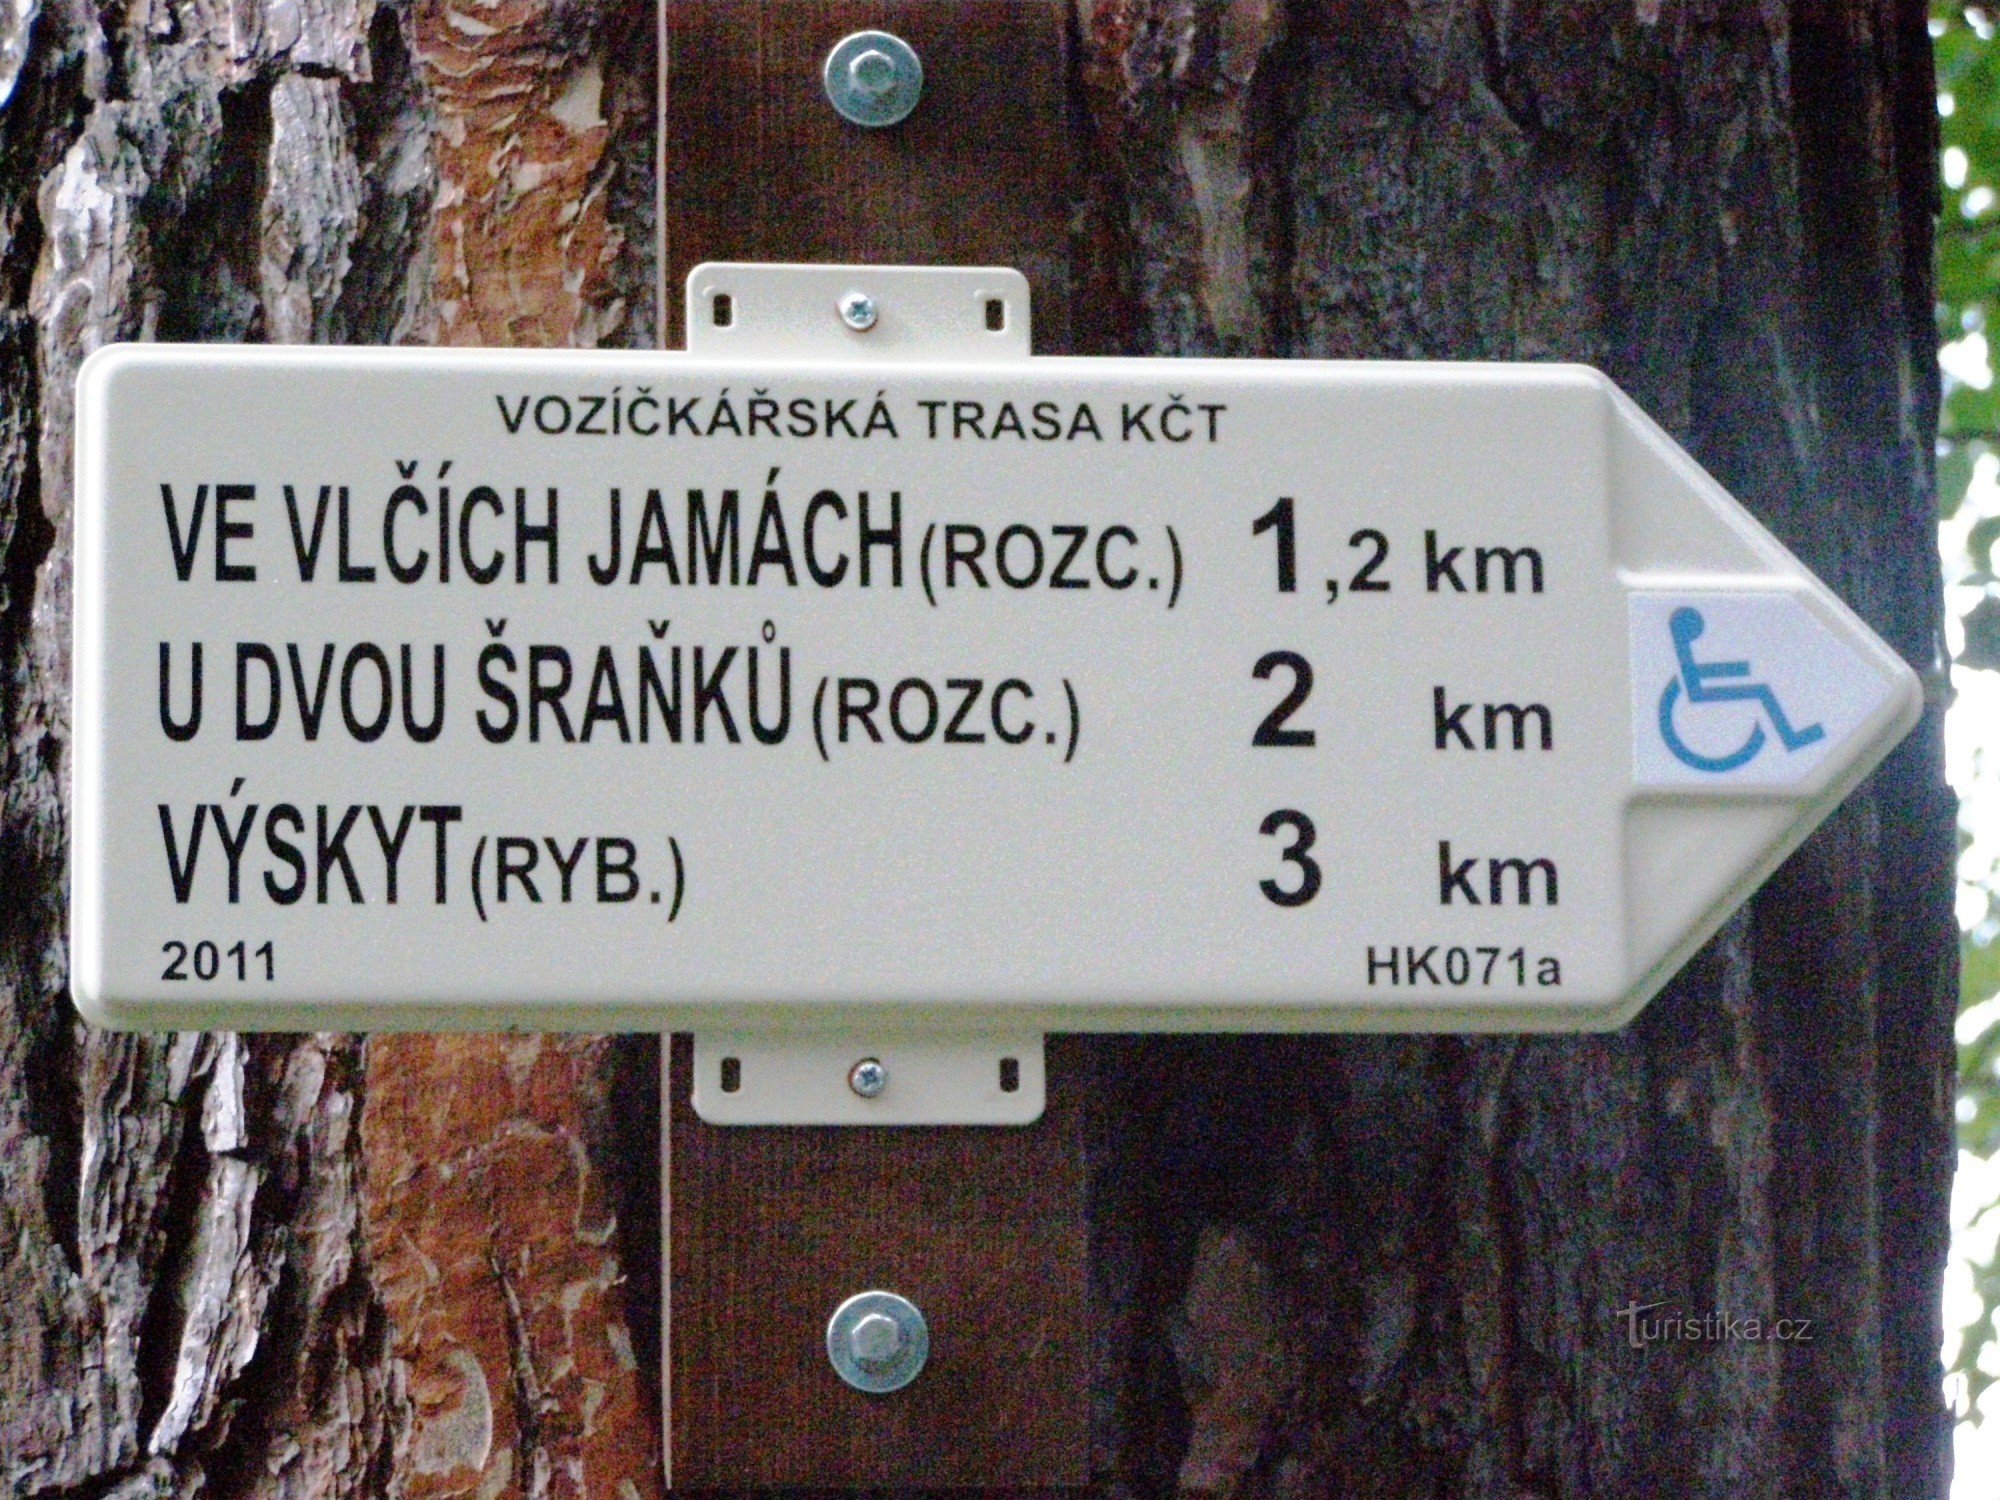 Wheelchair trails in the forests of Hradec Králové